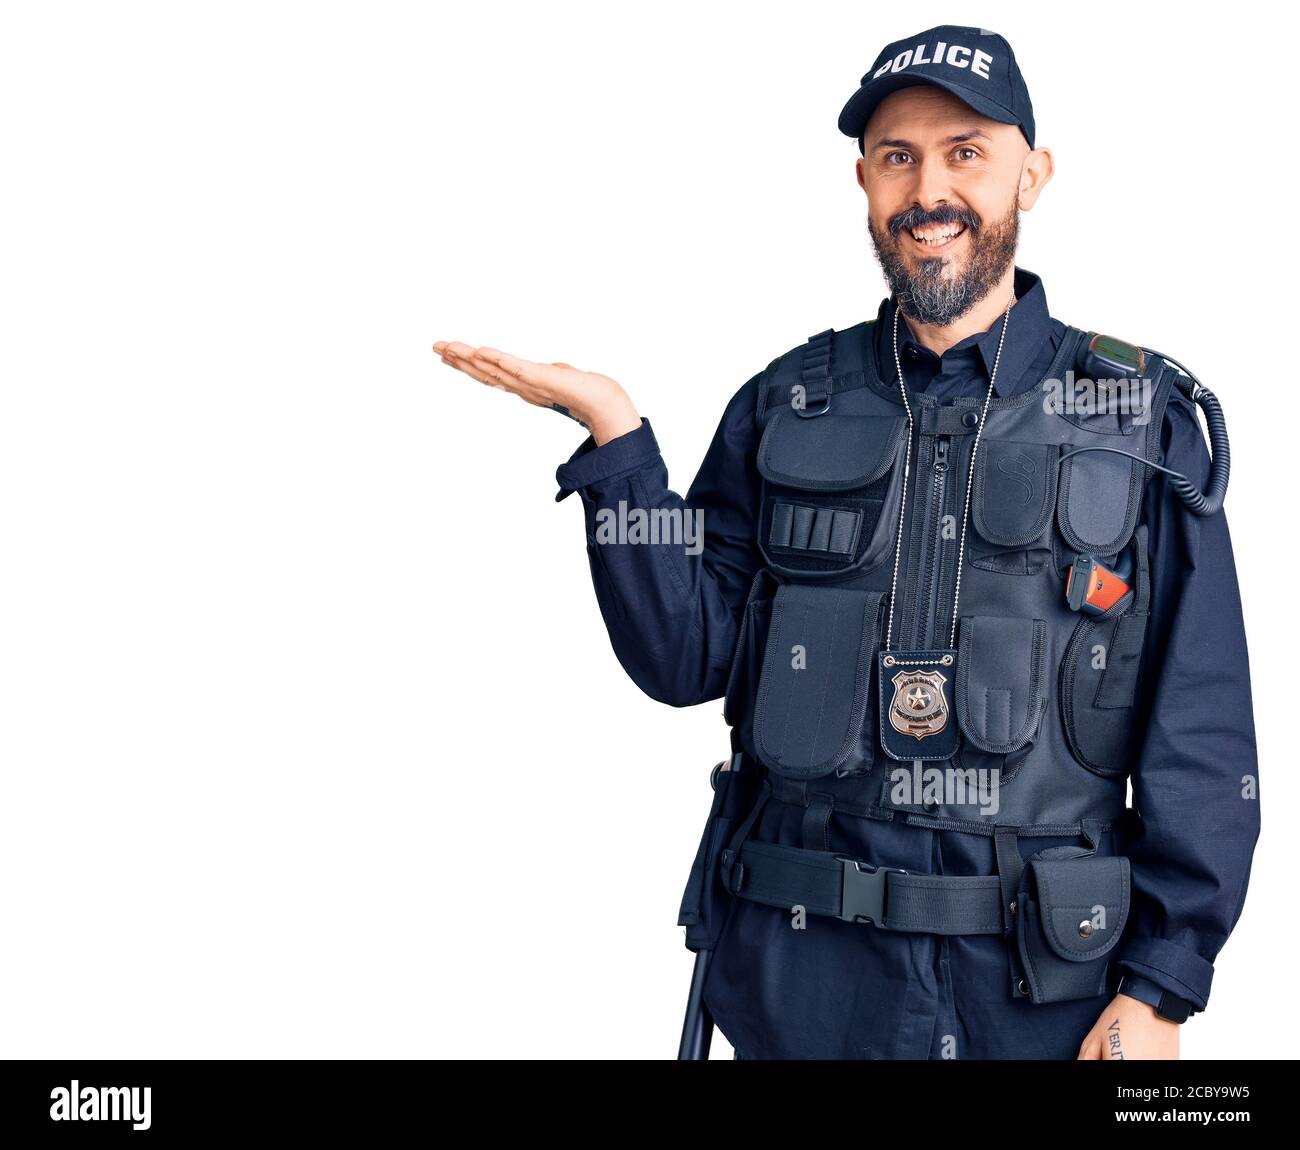 Young handsome man wearing police uniform smiling cheerful presenting and pointing with palm of hand looking at the camera. Stock Photo